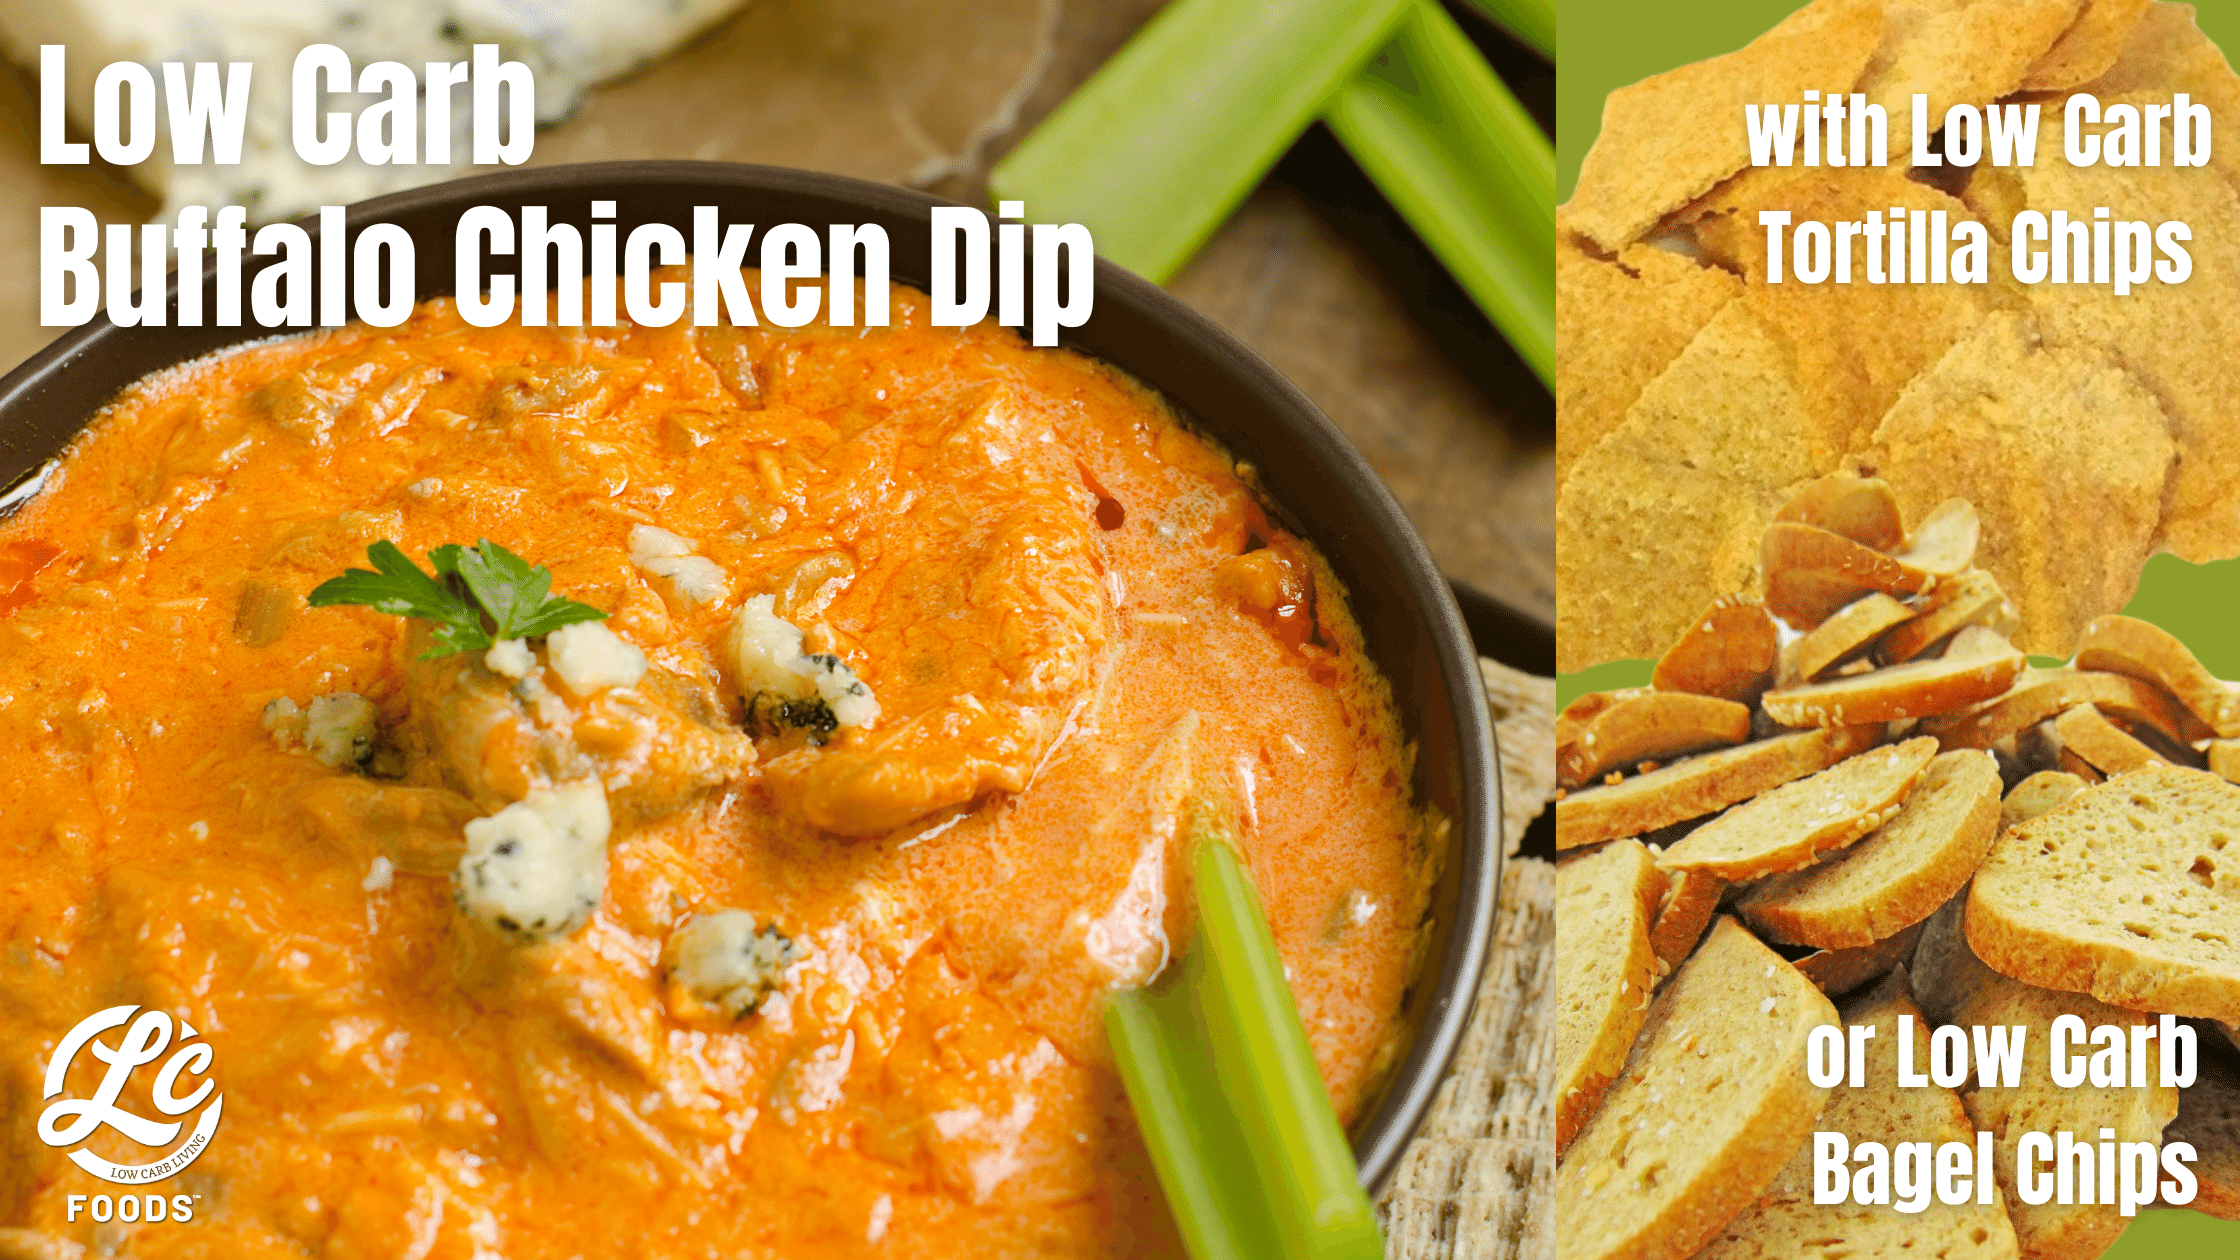 Thumbnail for Low Carb Buffalo Chicken Dip with Tortilla Chips or Bagel Chips